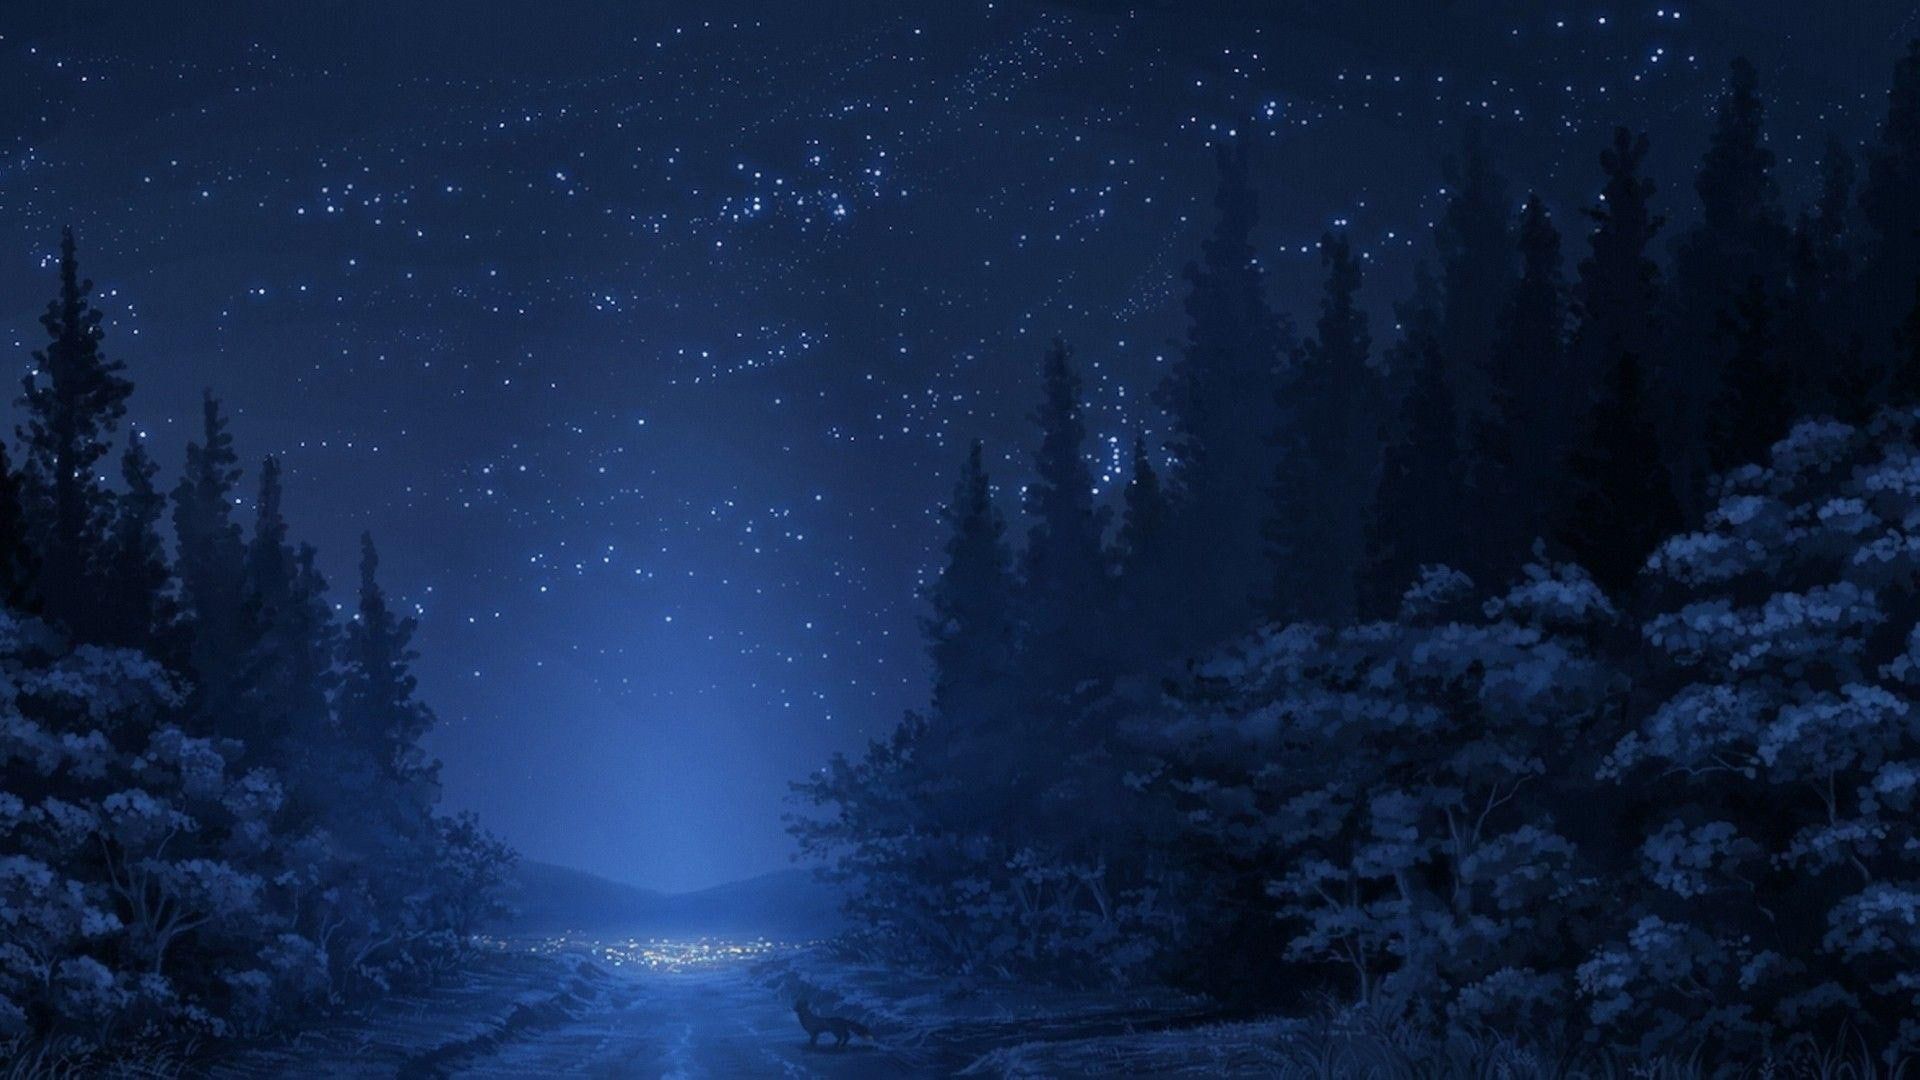 Anime scenery wallpaper, Anime scenery, Night forest